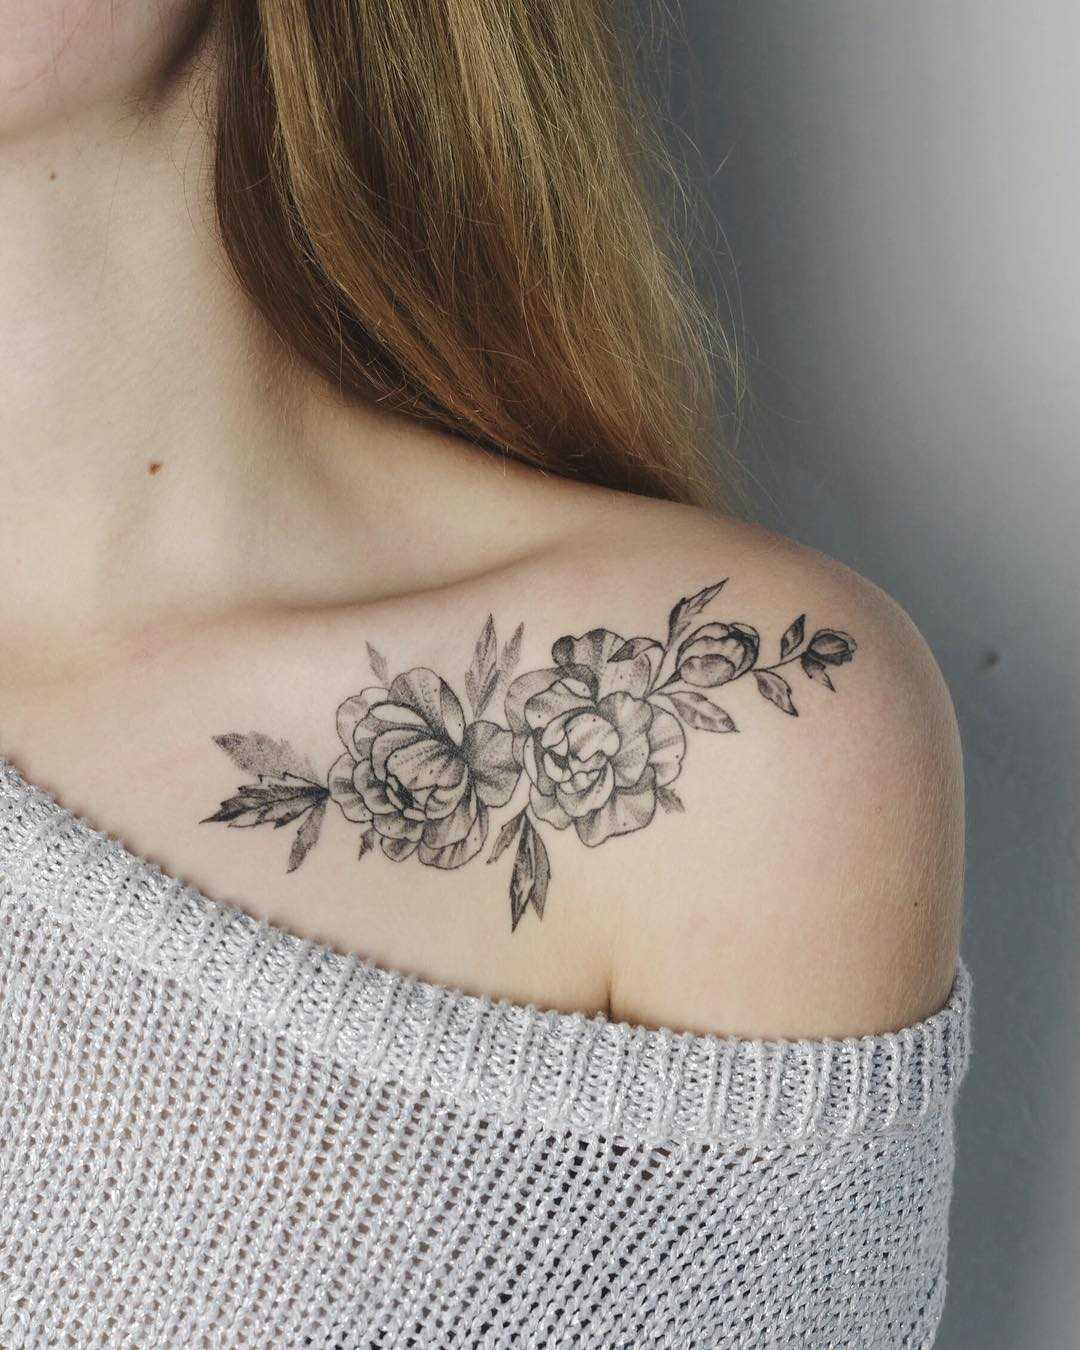 Floral tattoo on a collarbone